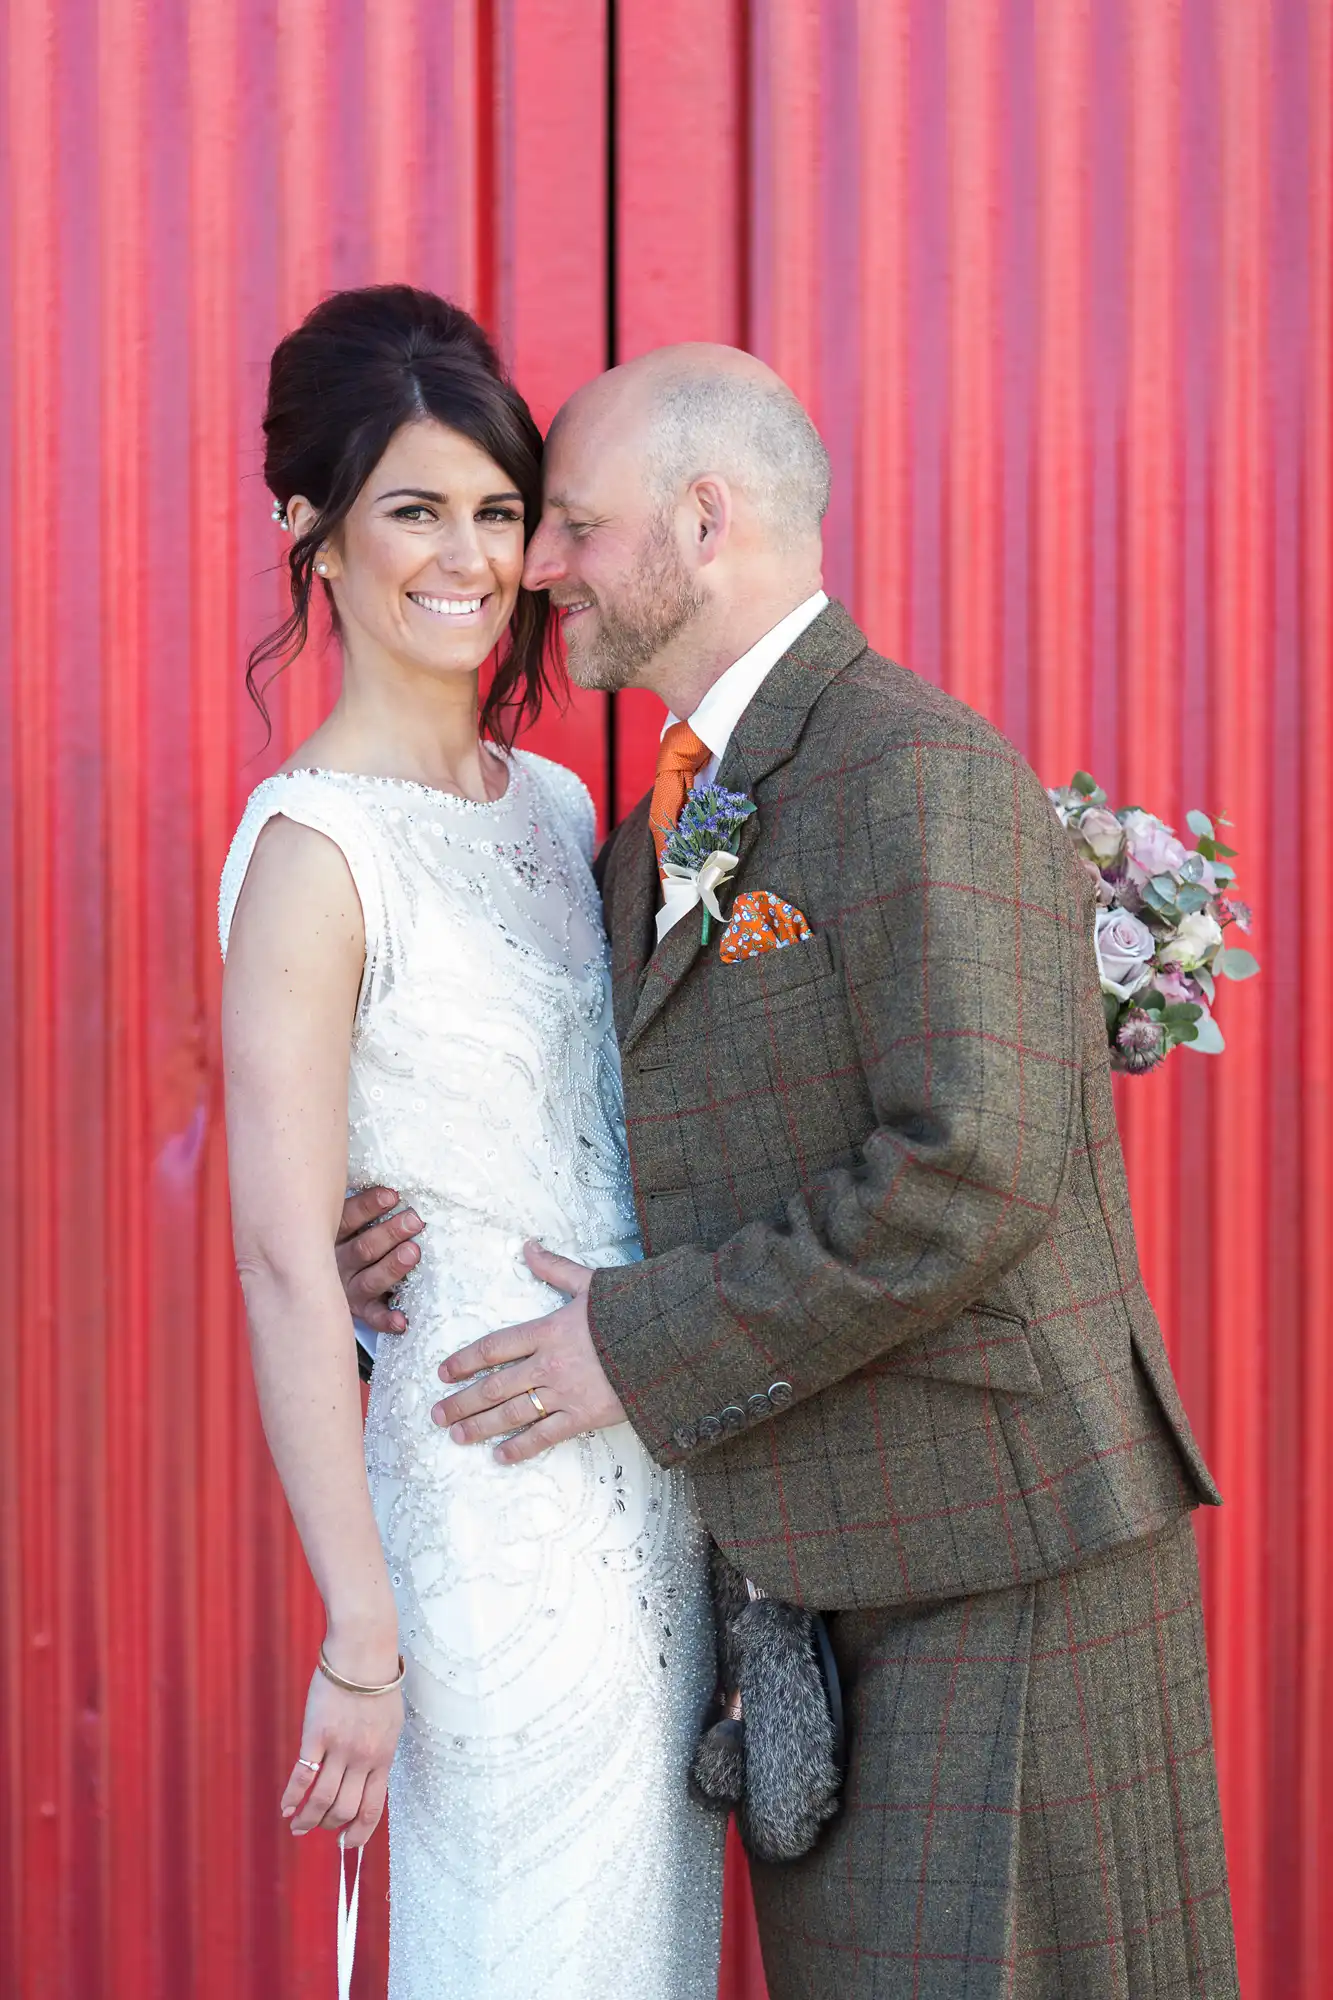 A bride and groom smiling, with the bride in a white dress and the groom in a tweed suit, standing before a red background.